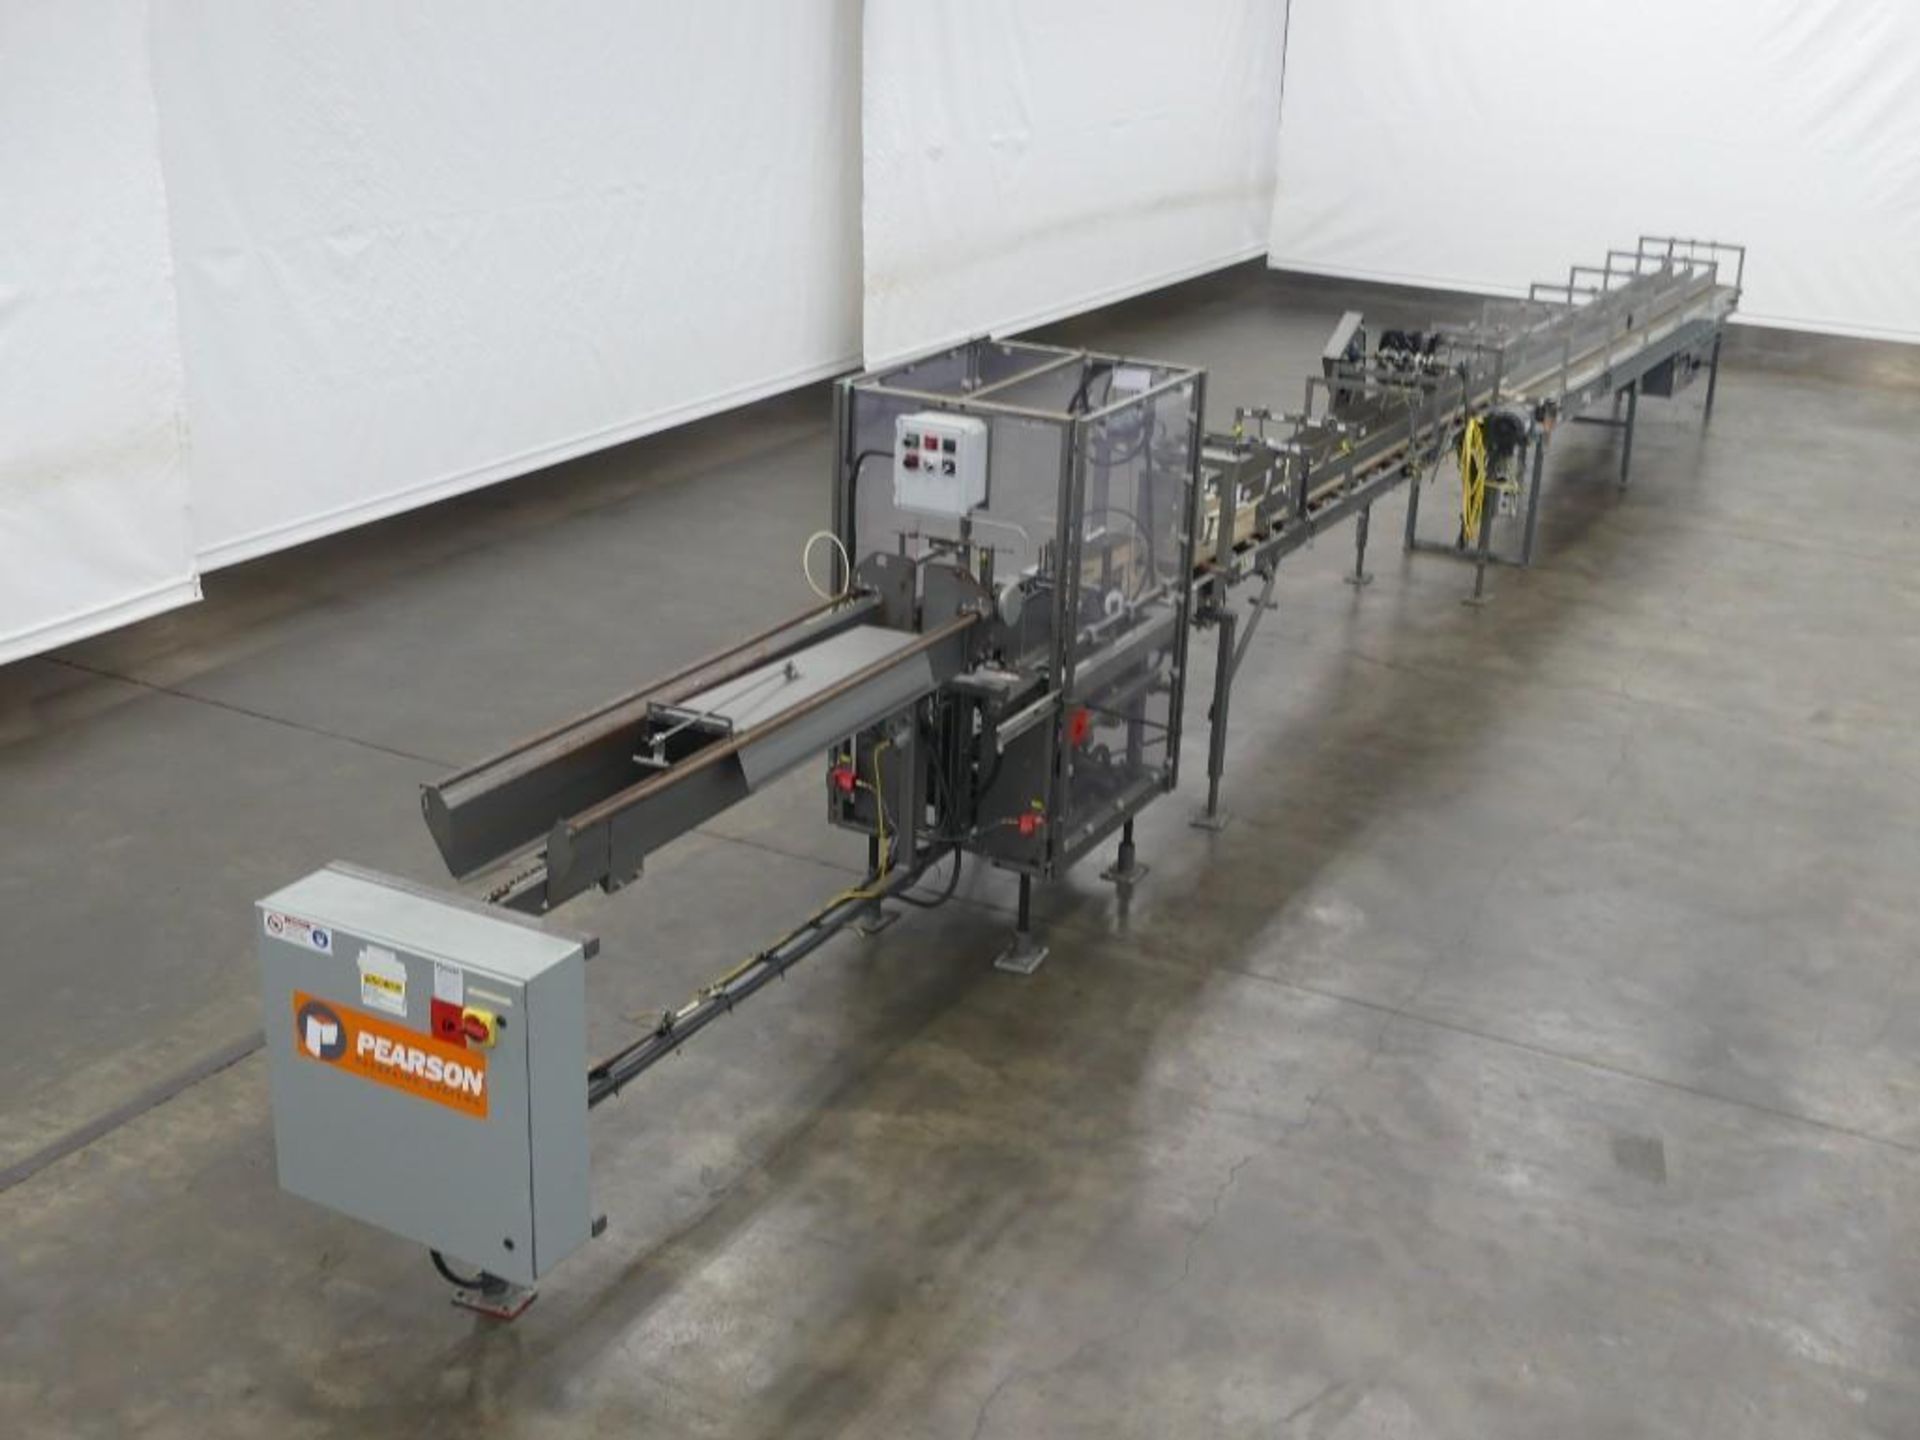 2008 Pearson BE60 6-Pack Beverage Carrier Erector with Twin Lane Conveyor